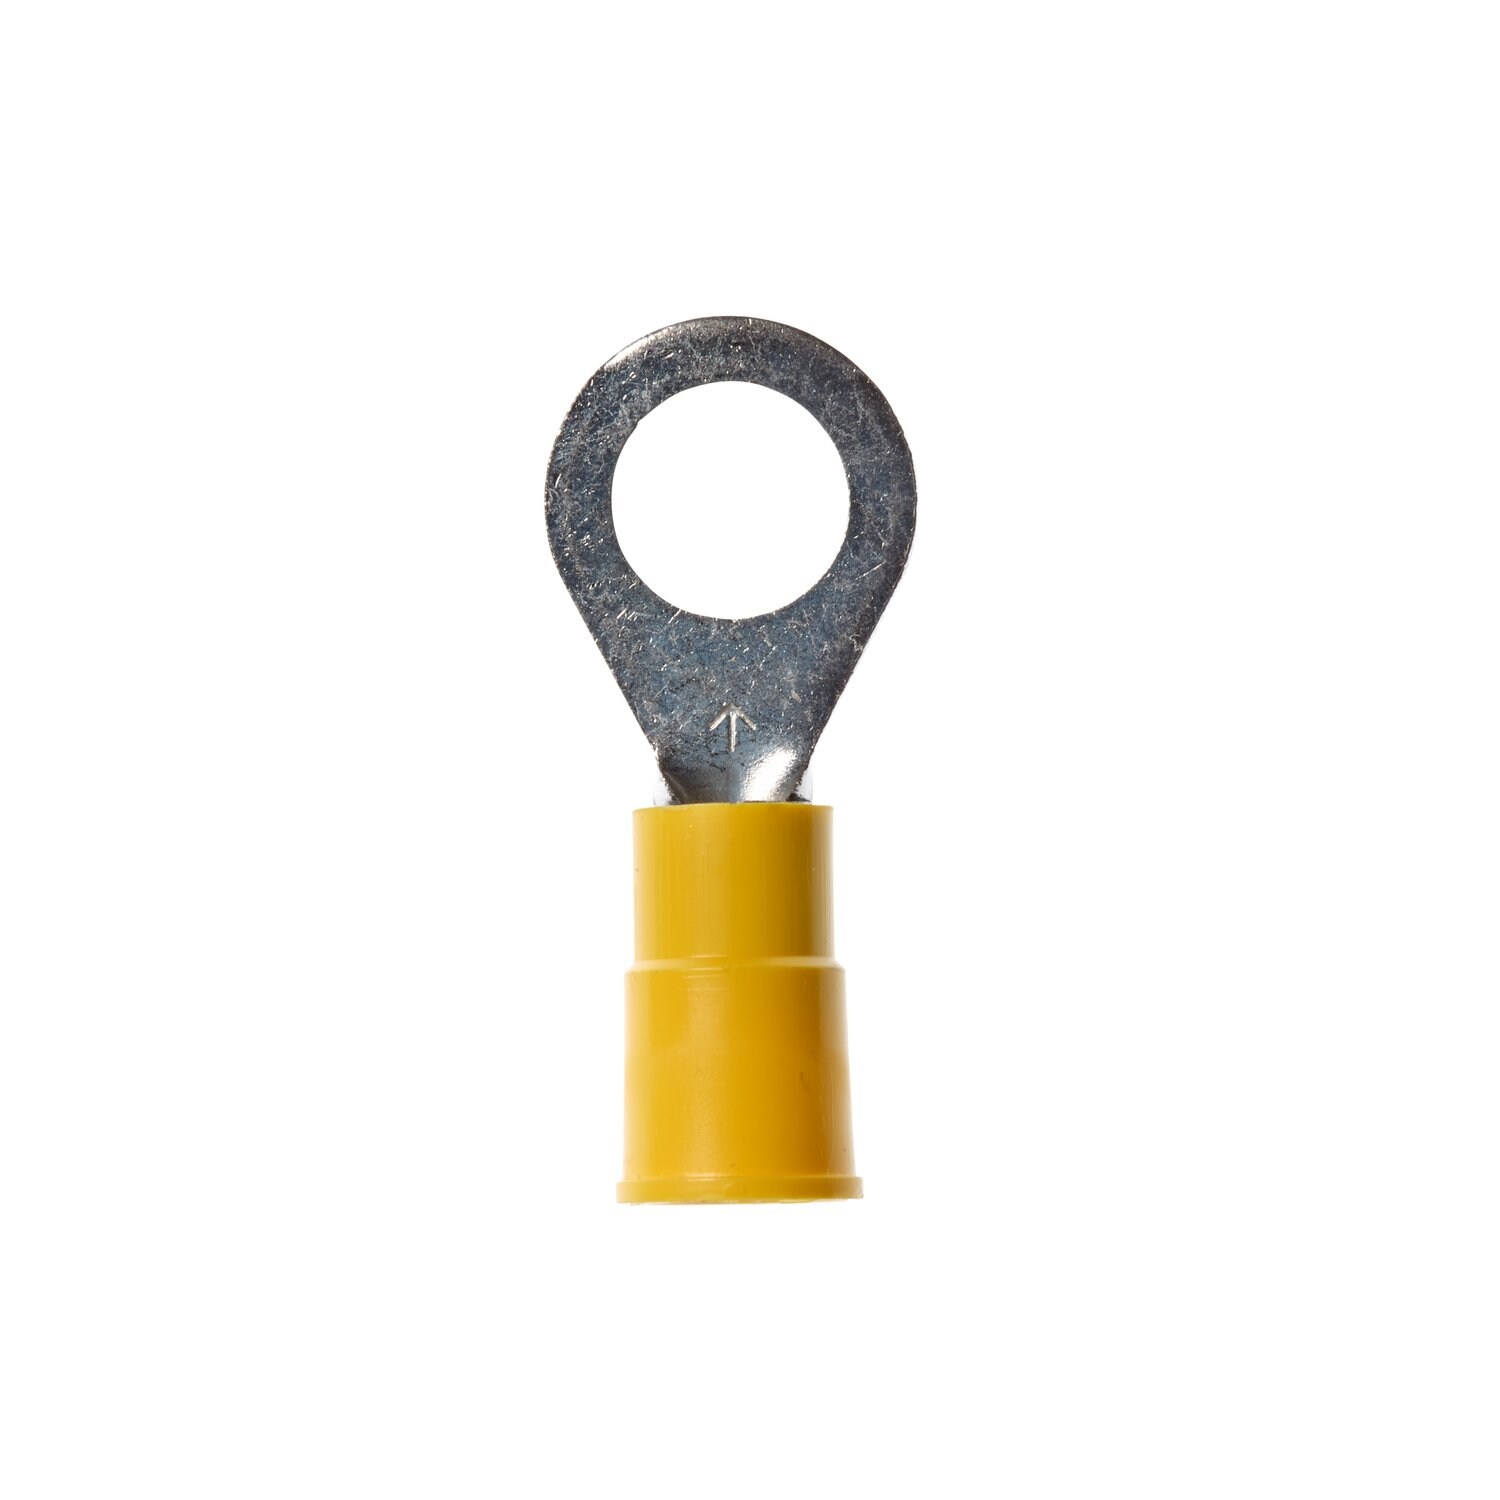 7000133339 - 3M Scotchlok Ring Vinyl Insulated, 50/bottle, MV10-516R/SX,
standard-style ring tongue fits around the stud, 500/Case